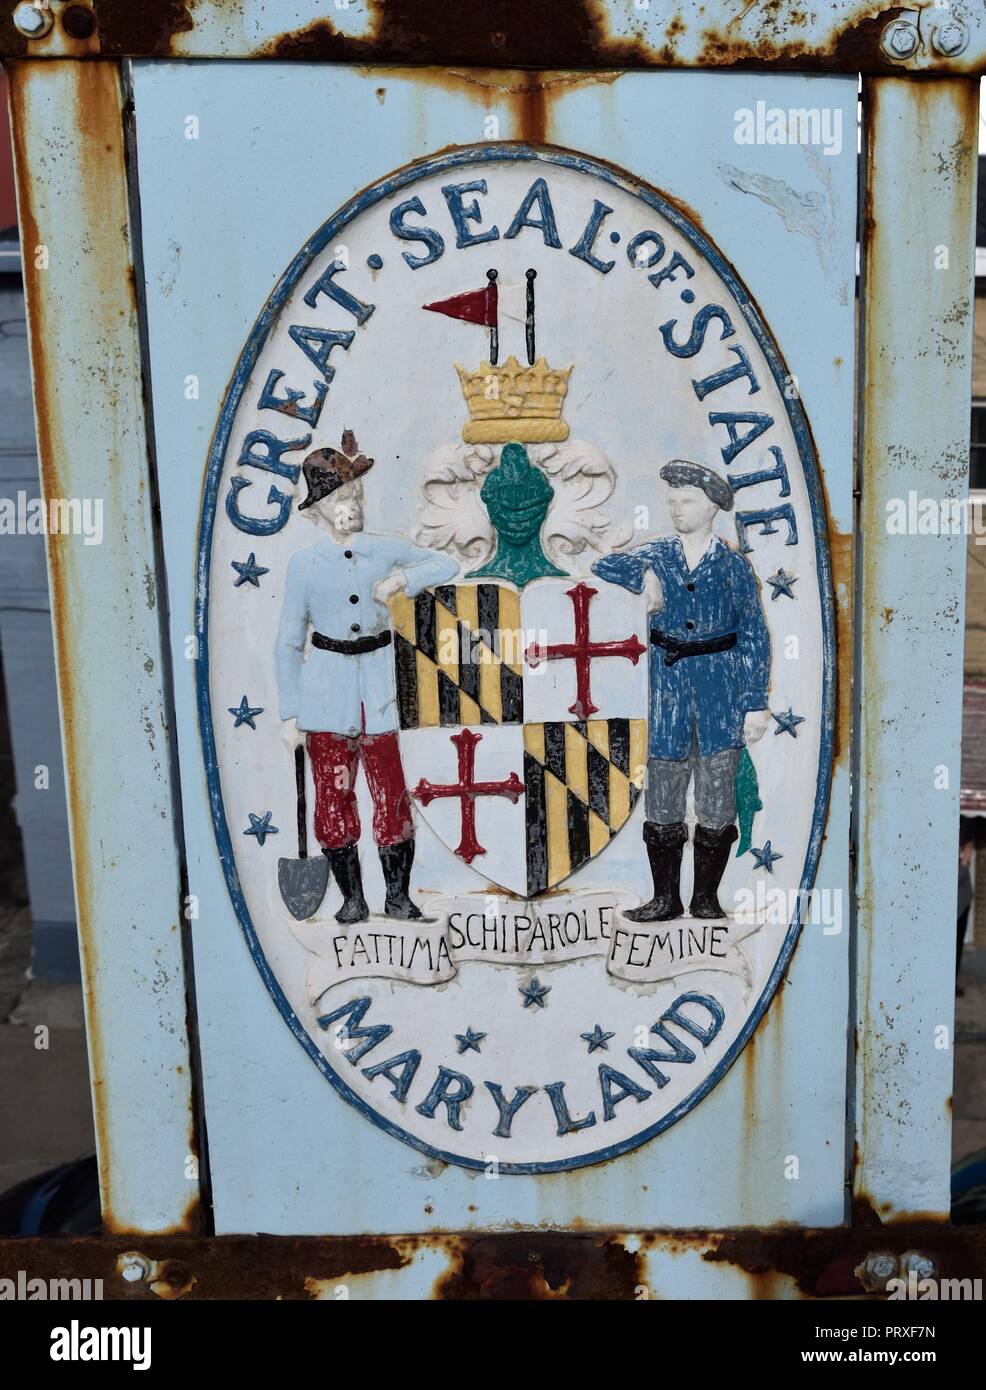 Public art in the form of great seals of the 13 original colonies along with Allegheny County found emblazoned and painted on the 40th Street Bridge Stock Photo